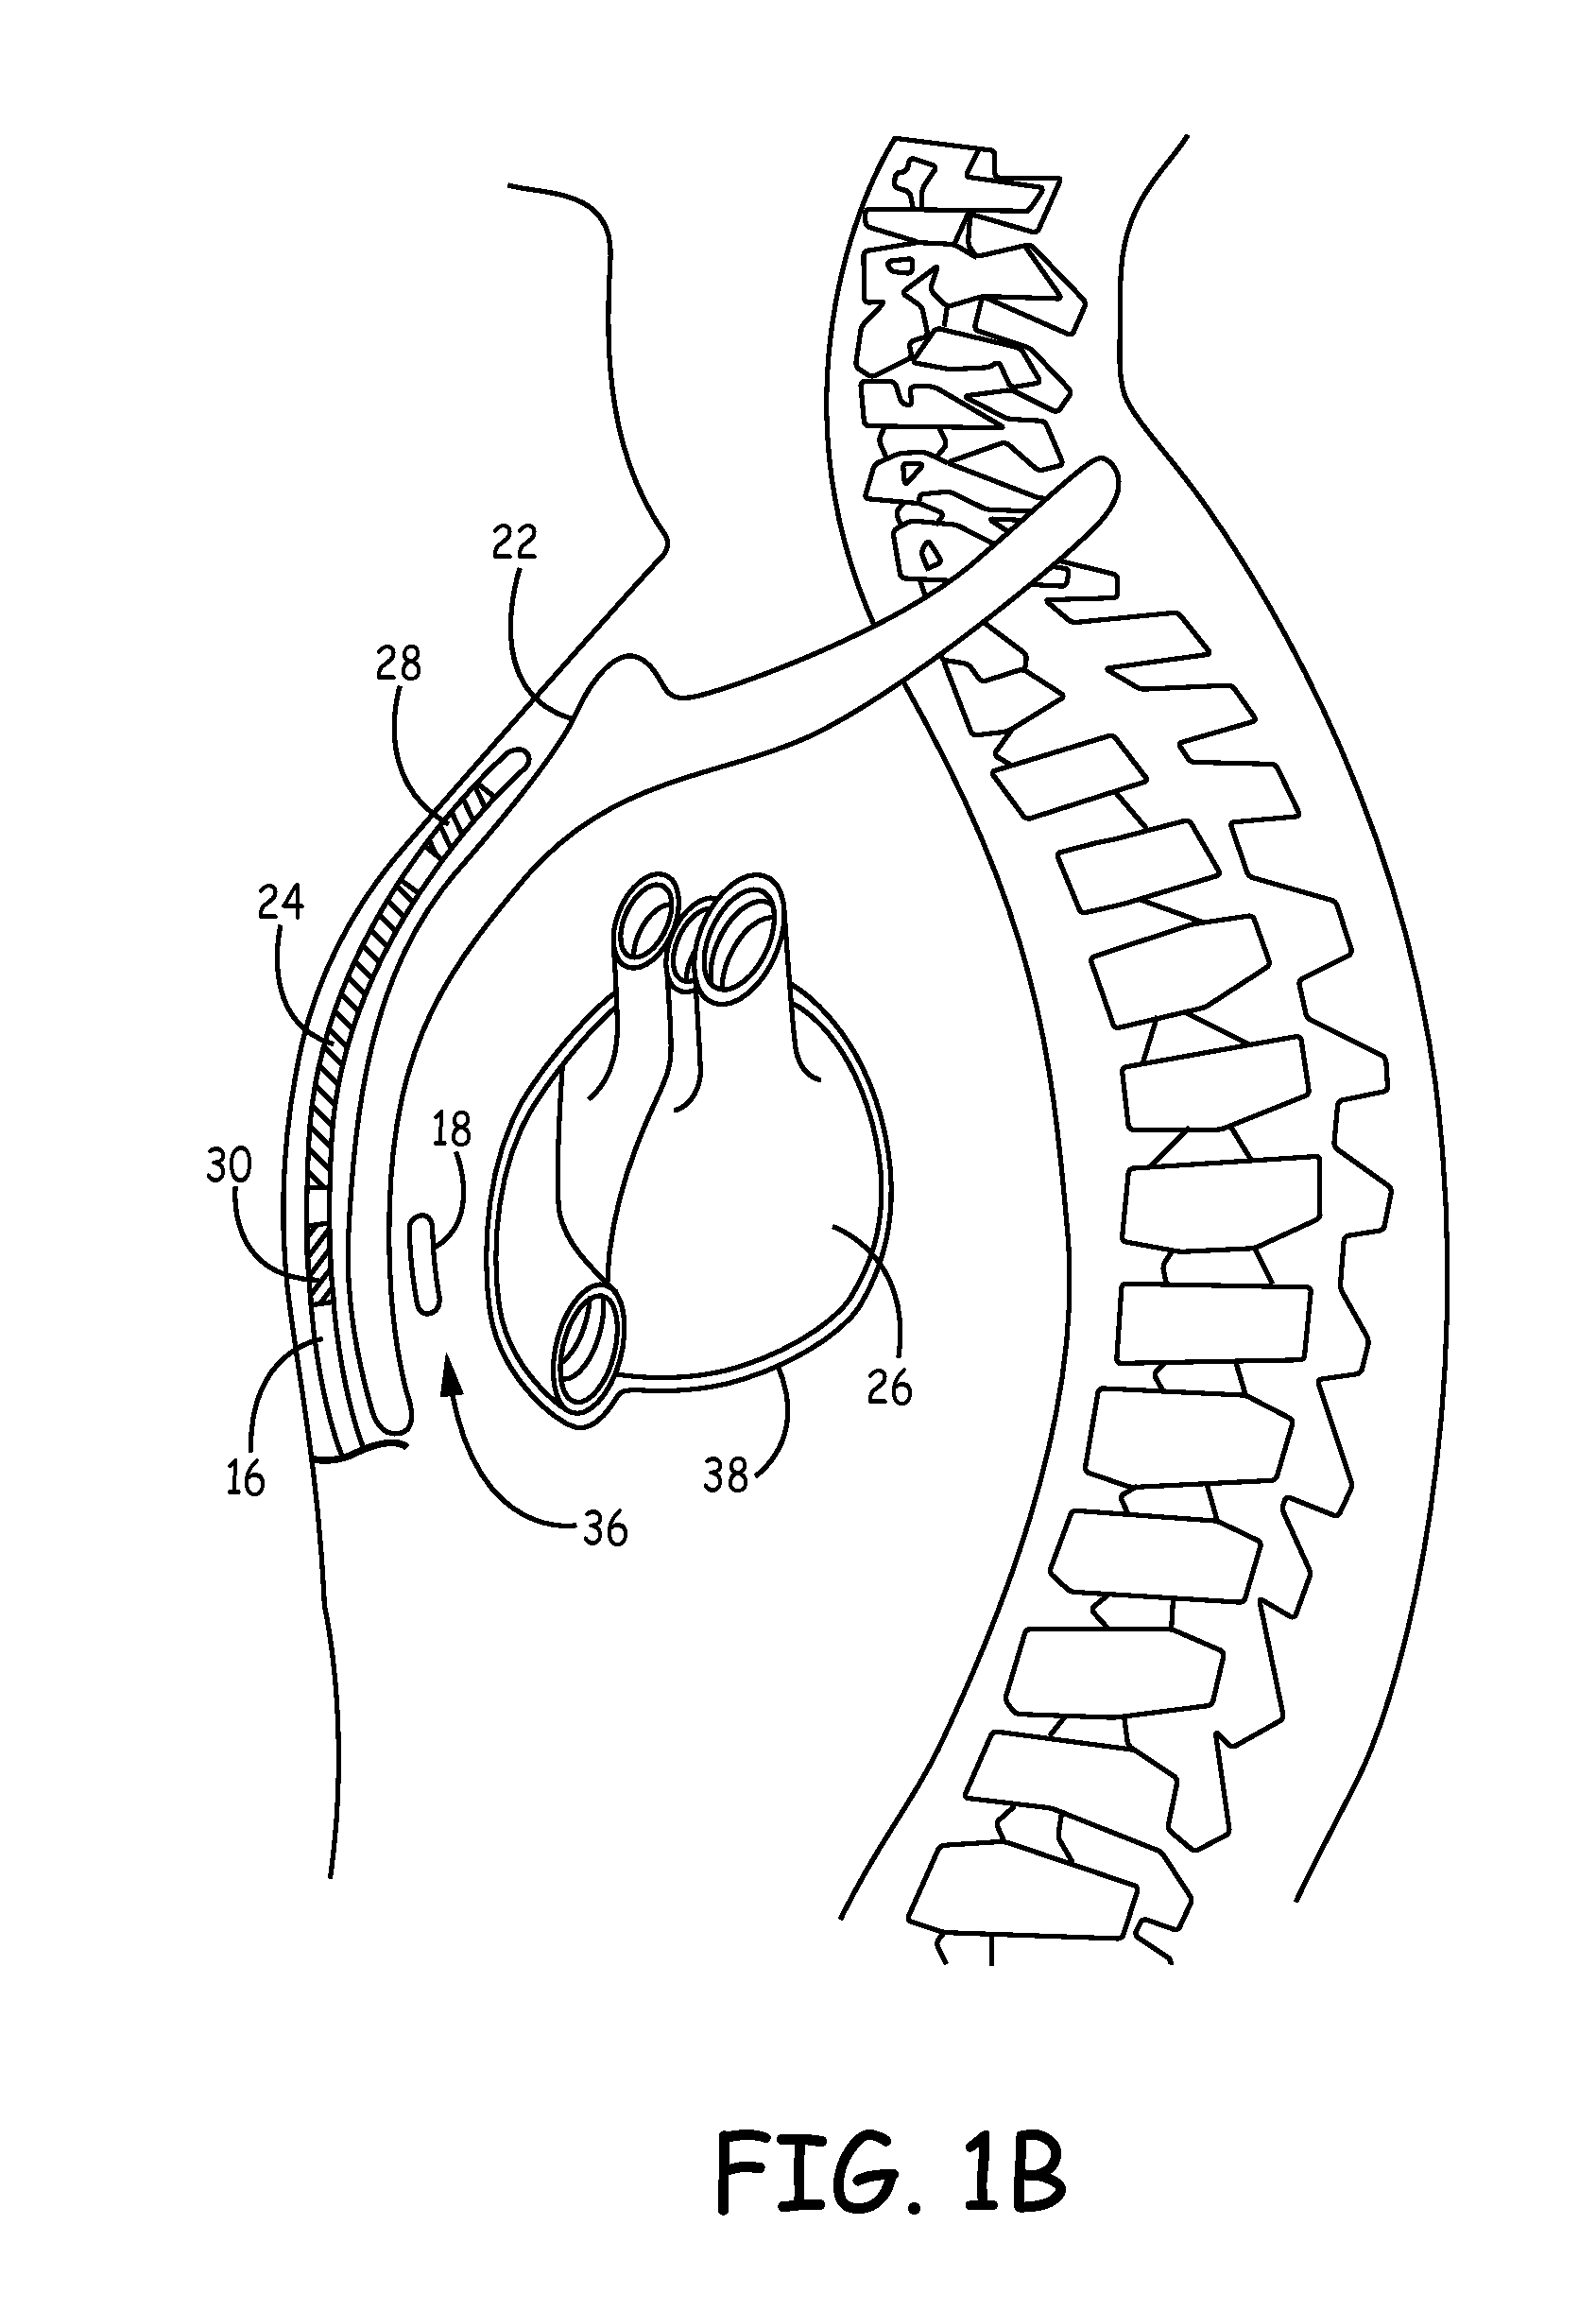 Implantable medical device system having implantable cardioverter-defibrillator (ICD) system and substernal leadless pacing device